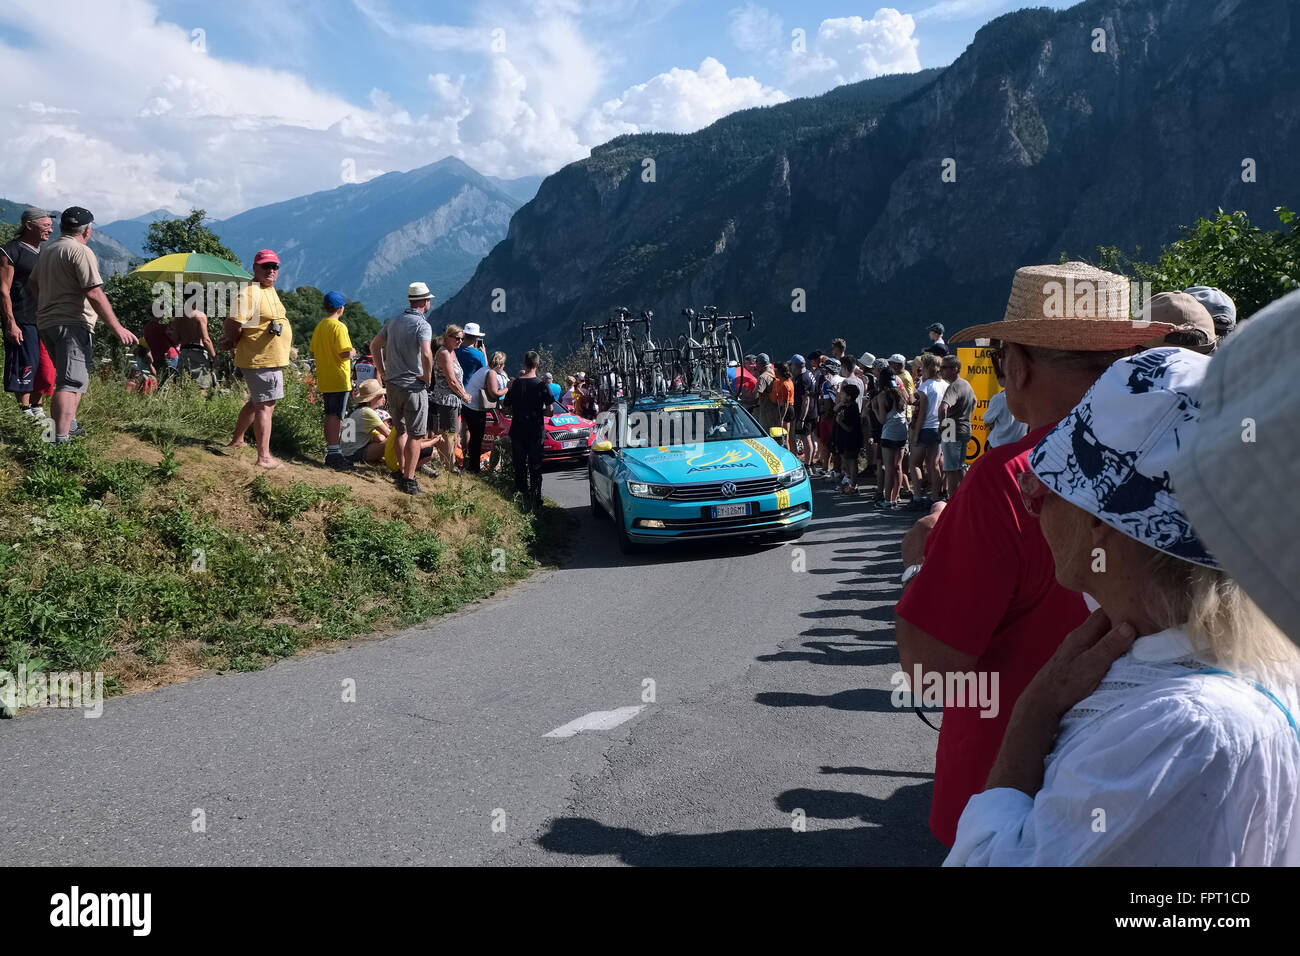 a support car from the Astana team in a hair pin turn in the tour de france 2015 Stock Photo